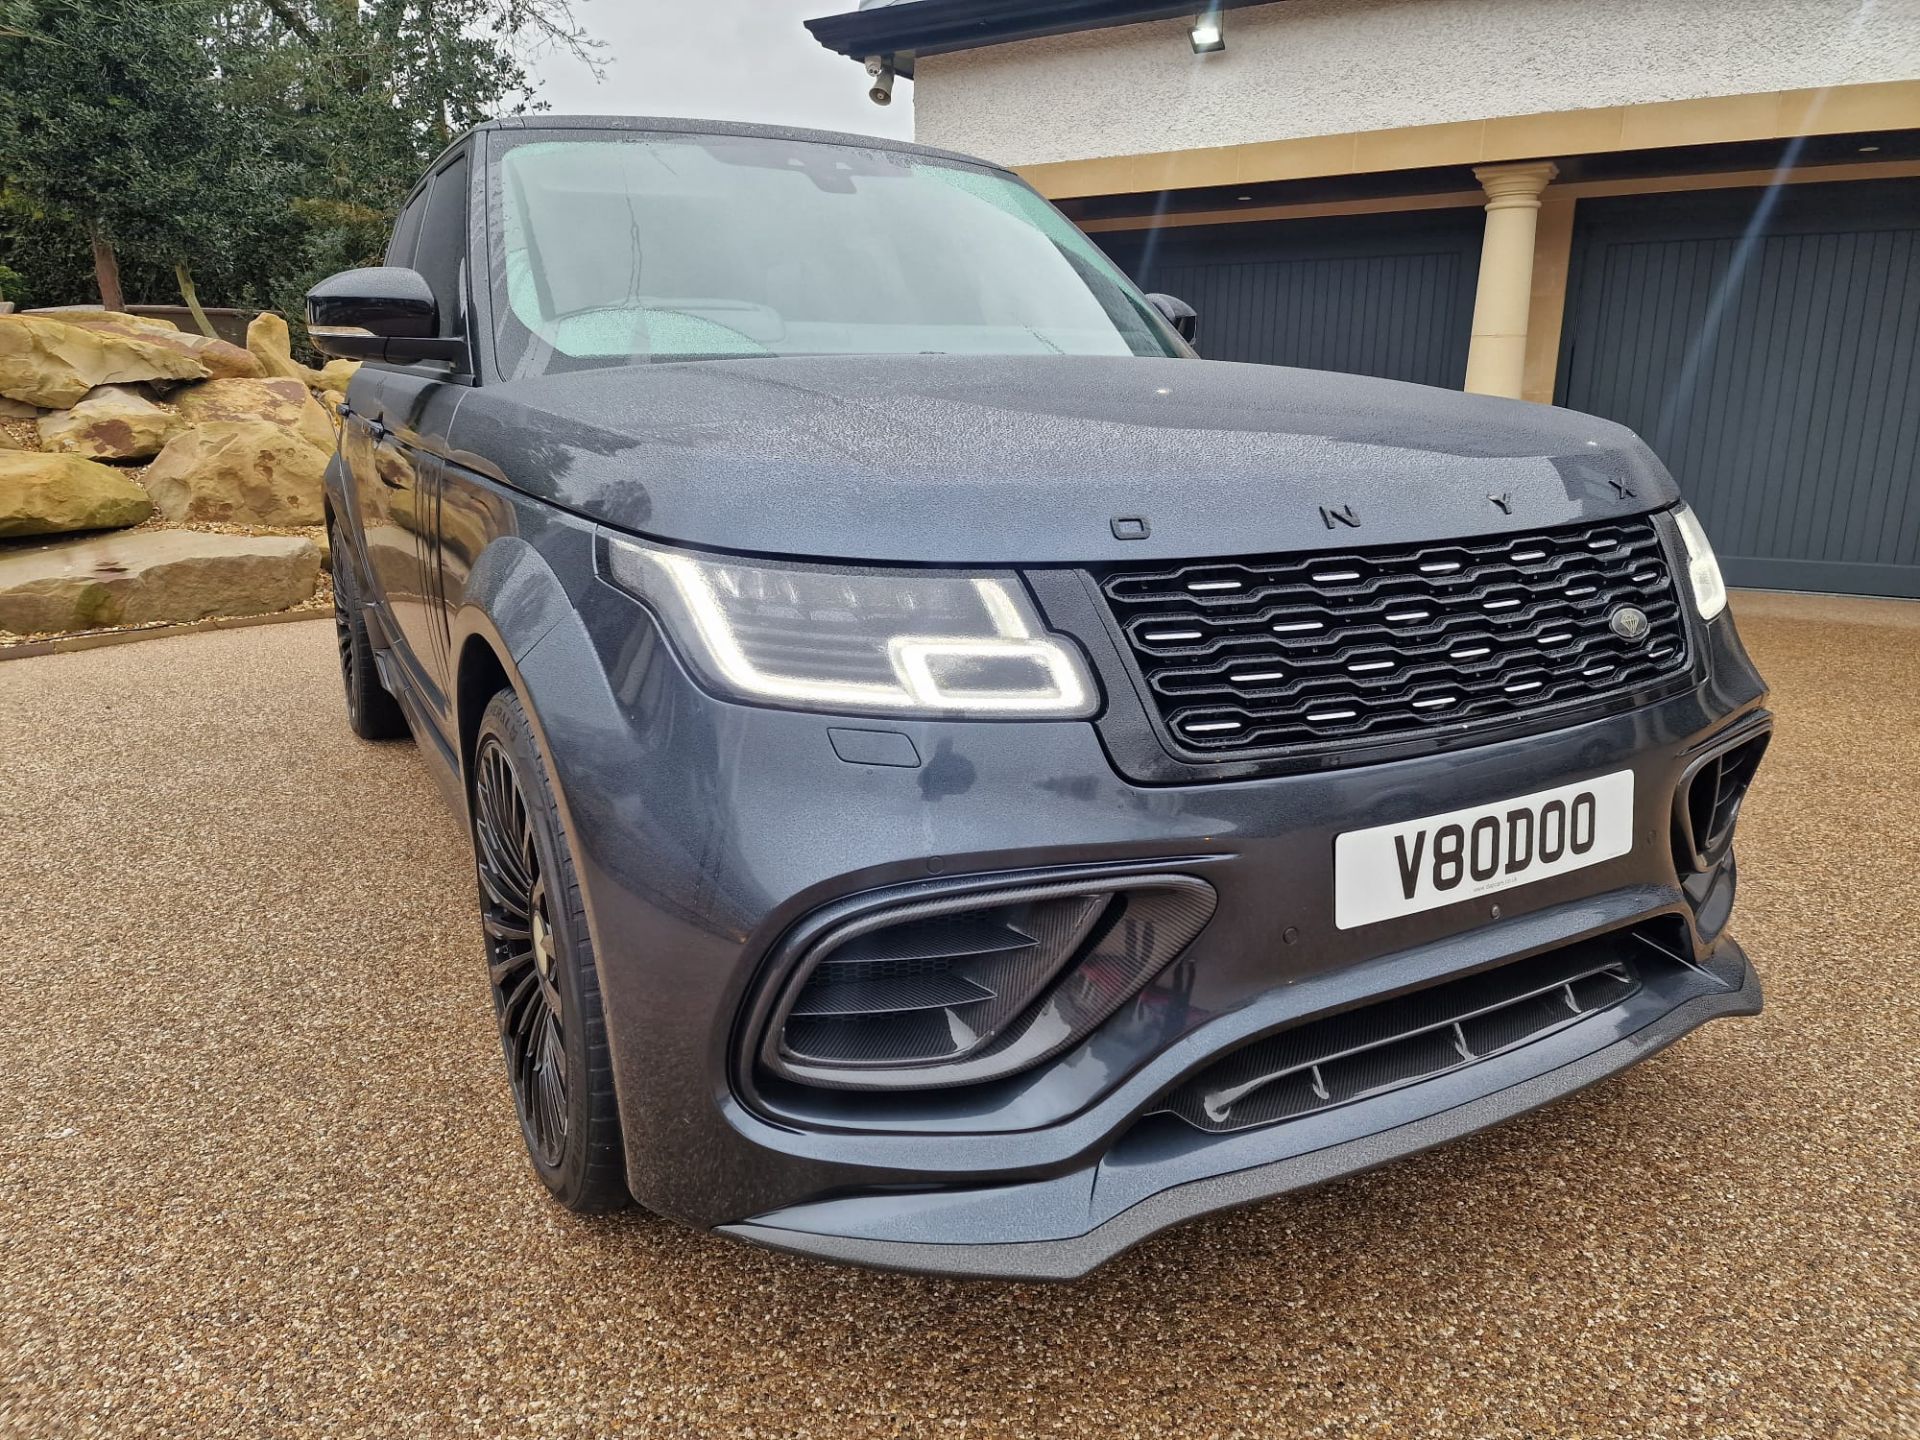 2018/68 RANGE ROVER SV AUTOBIOGRAPHY DYN V8 SC AUTO - £40K WORTH OF ONYX BODY KIT AND CONVERSION - Image 7 of 77